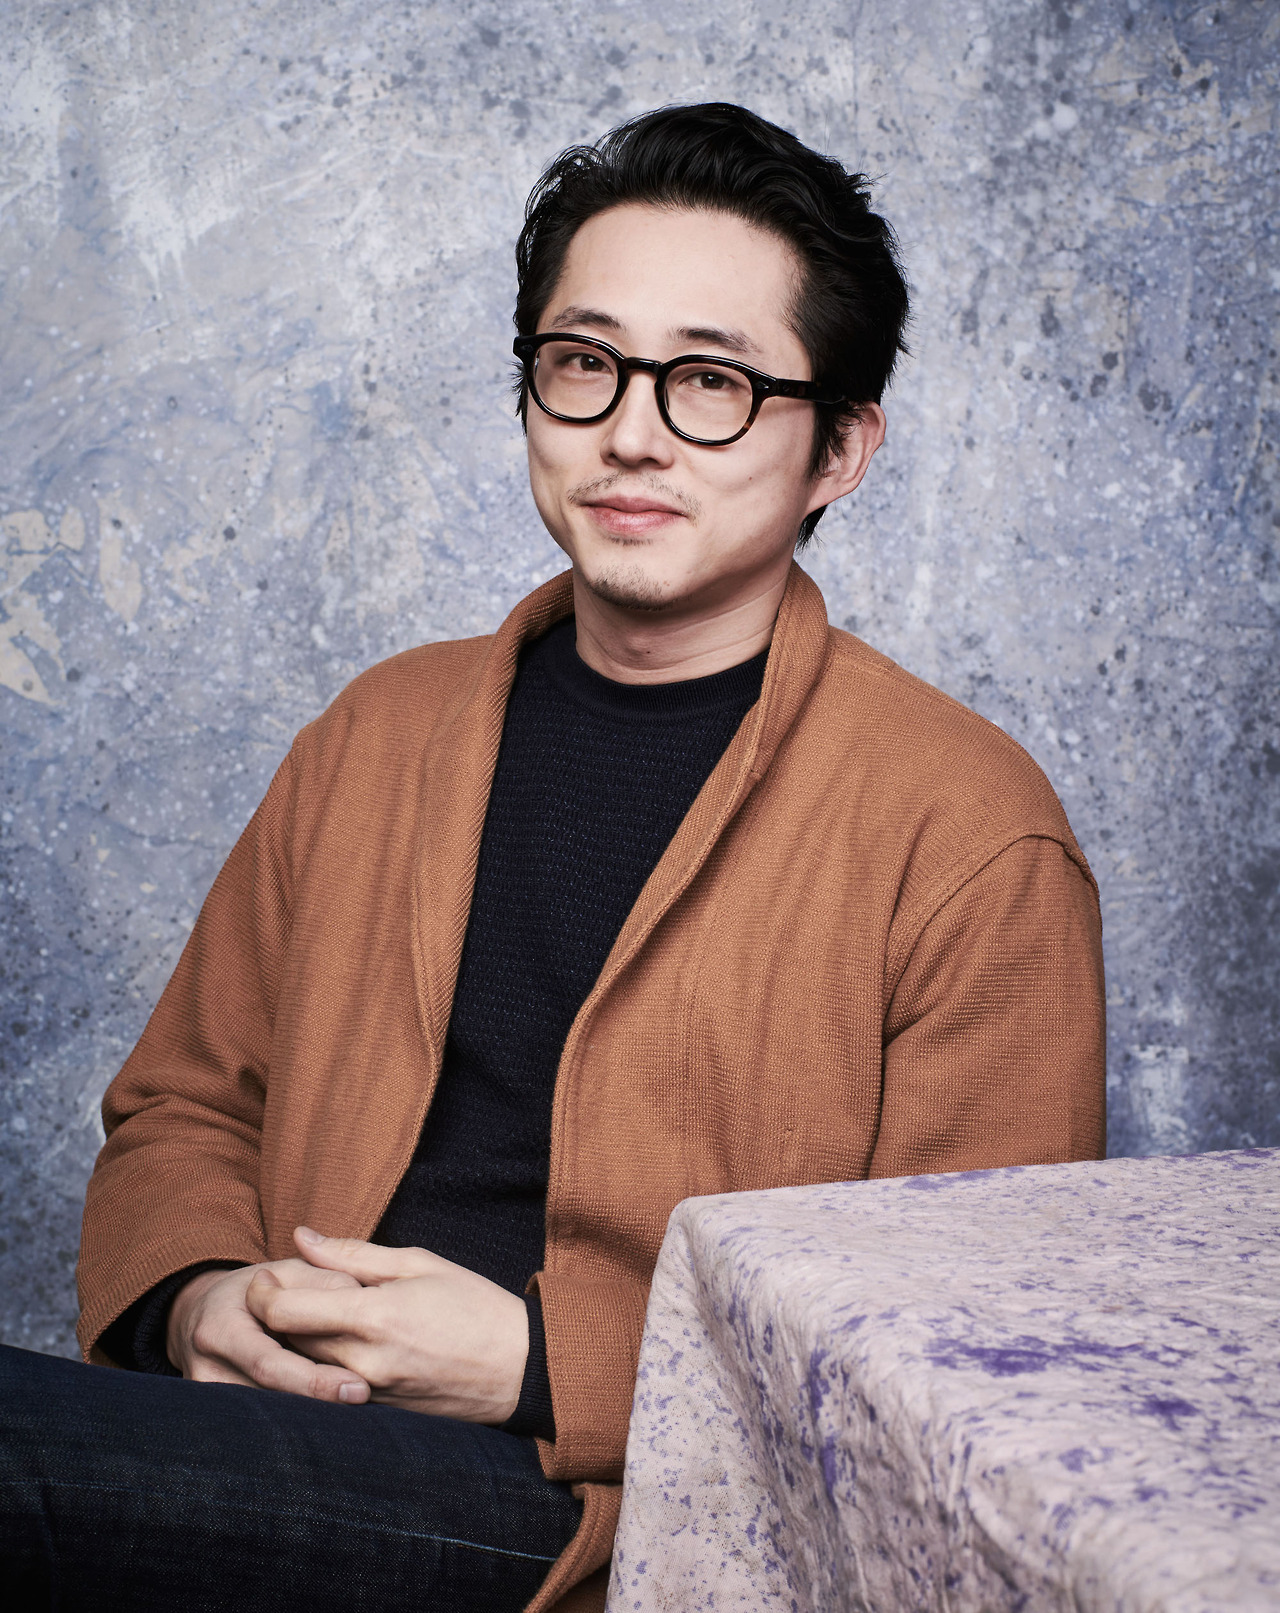 celebsofcolor: Steven Yeun poses for a portrait at Deadline Hollywood Studio during